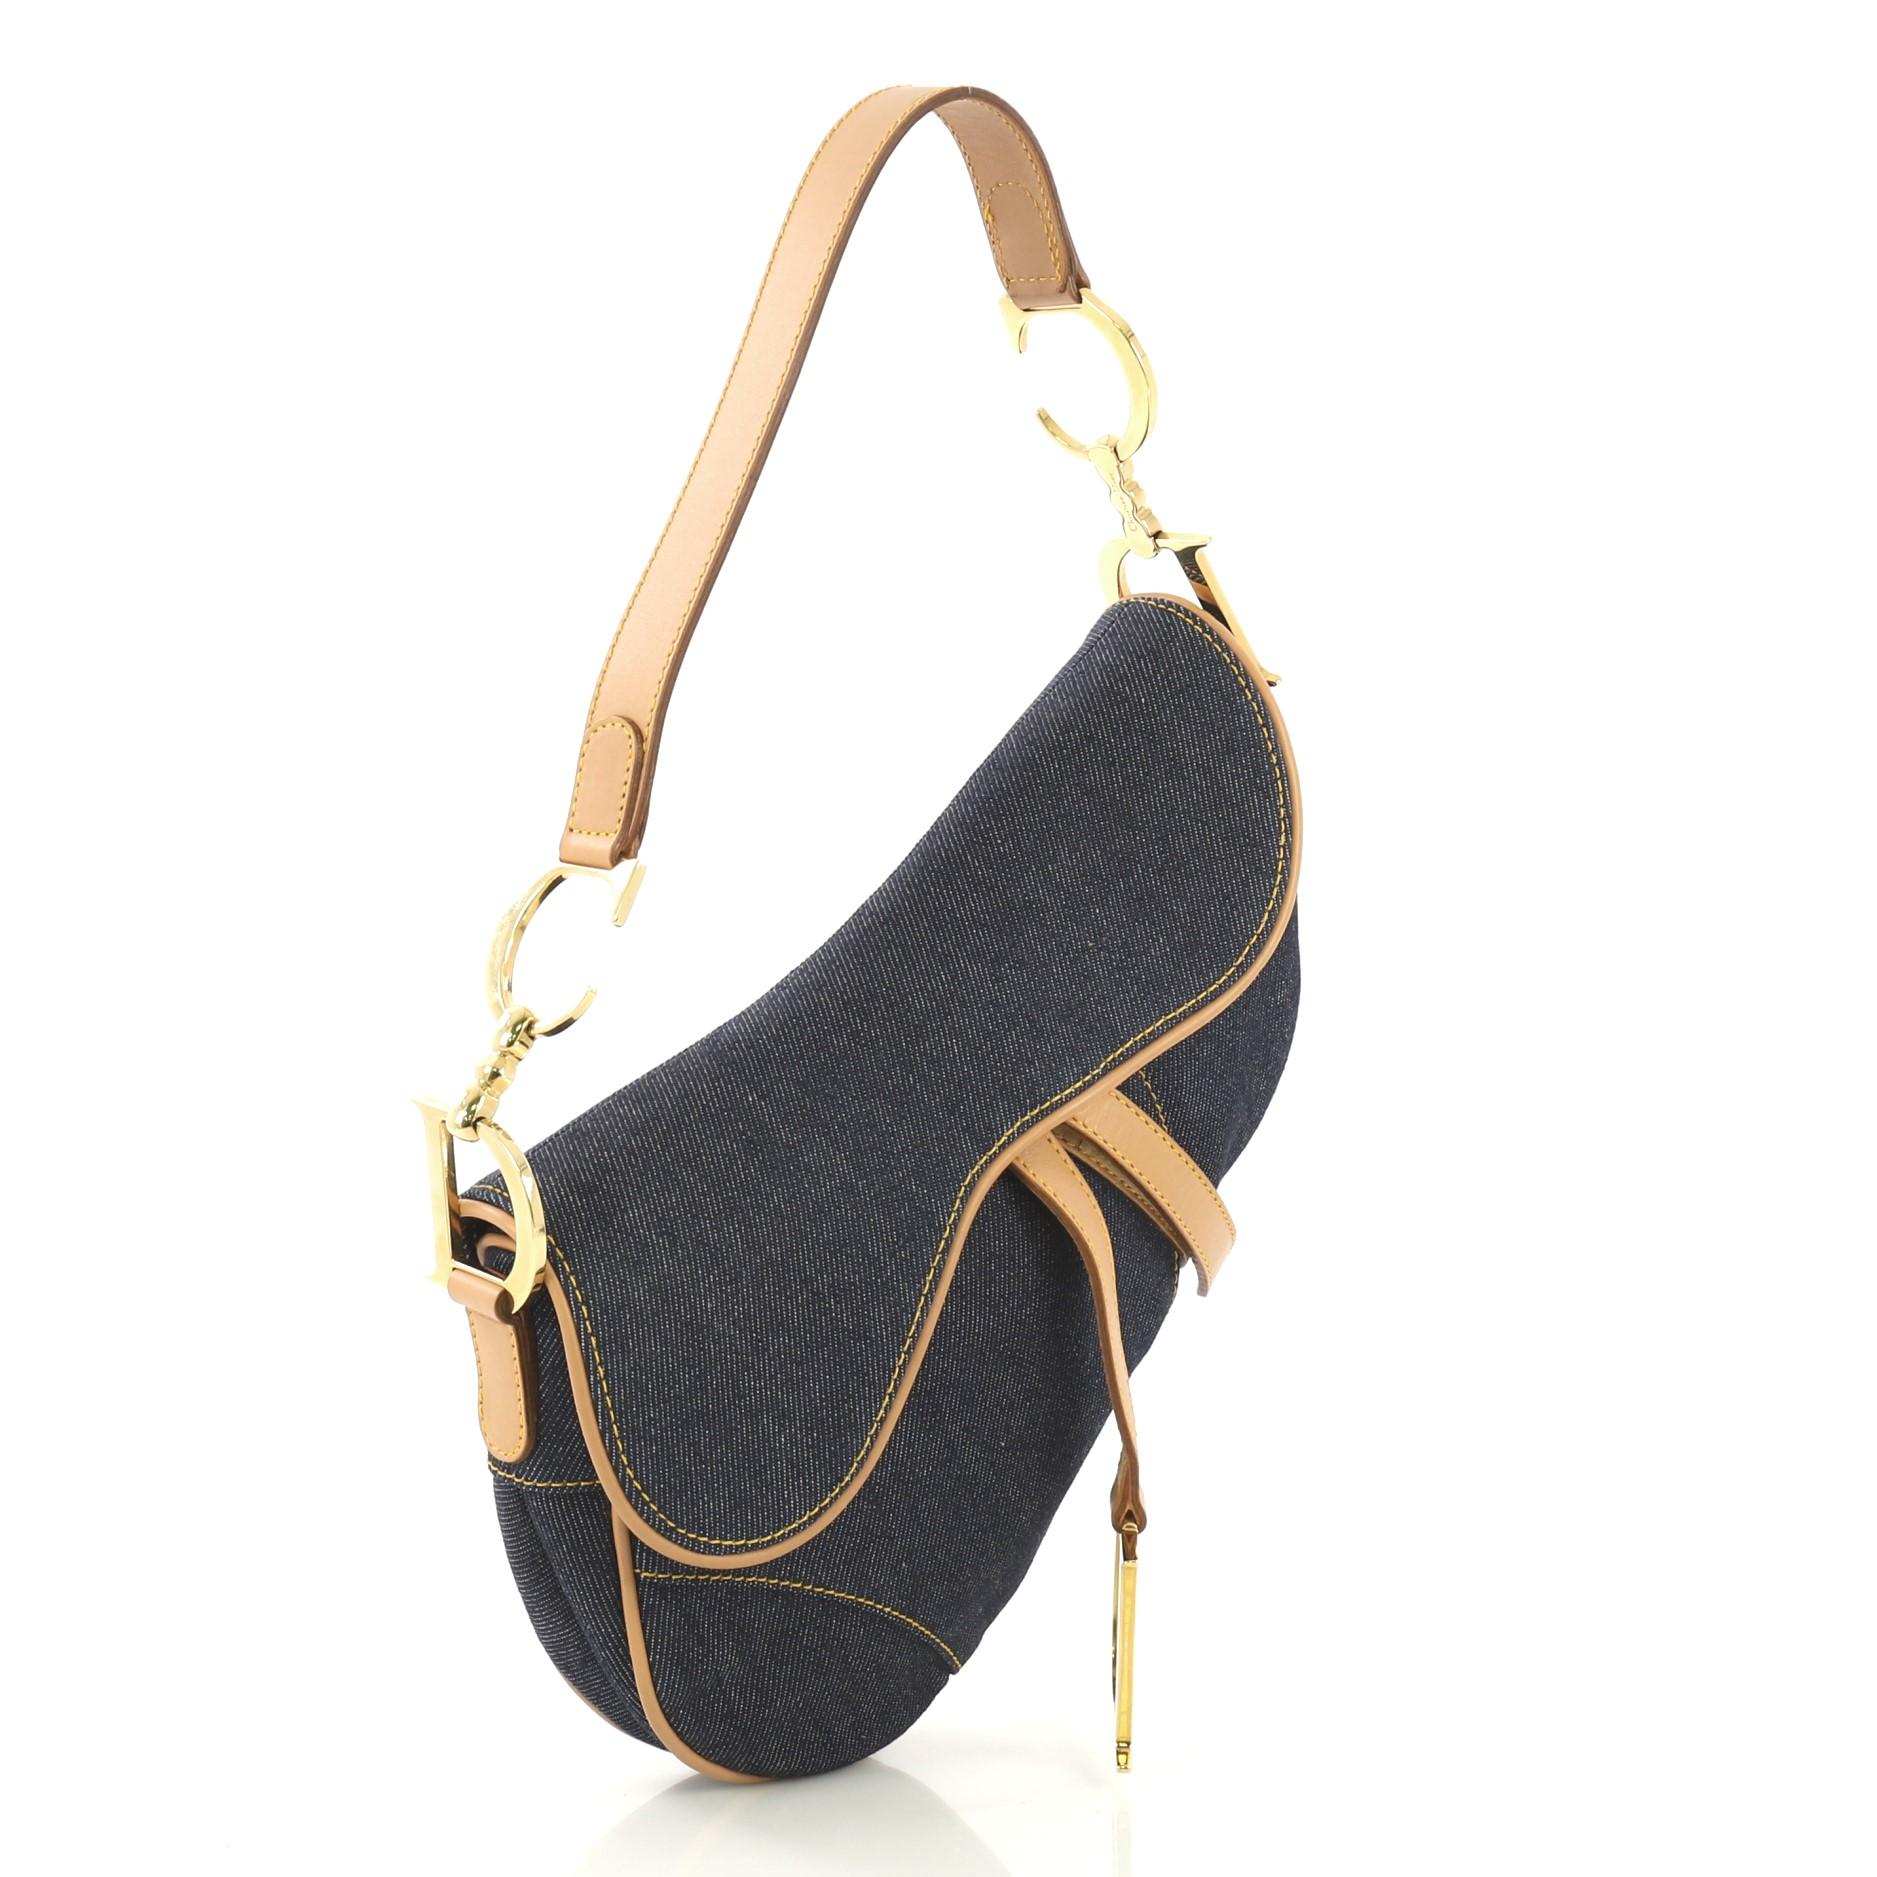 This Christian Dior Vintage Saddle Bag Denim Medium, crafted from blue denim, features a top handle adorned with metal 'CD' finishing, saddle-shaped silhouette, and gold-tone hardware. Its fold over top opens to a white printed fabric interior with